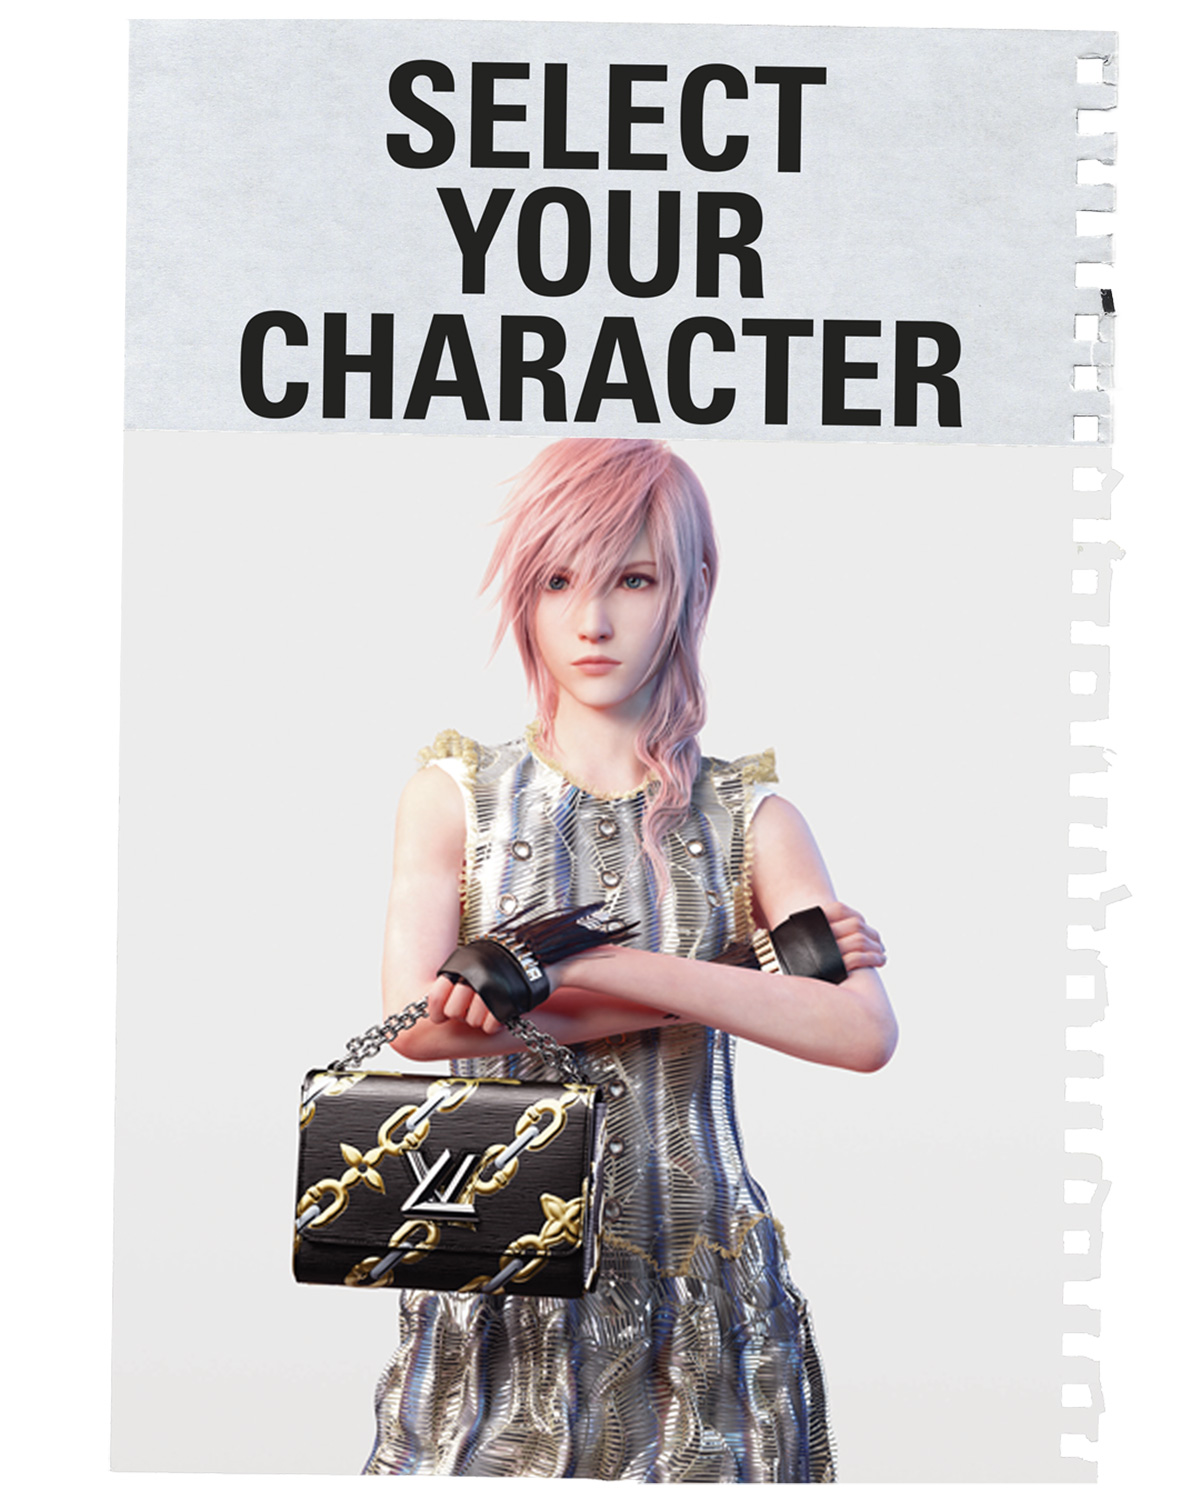 What's the Deal With Final Fantasy and Louis Vuitton?